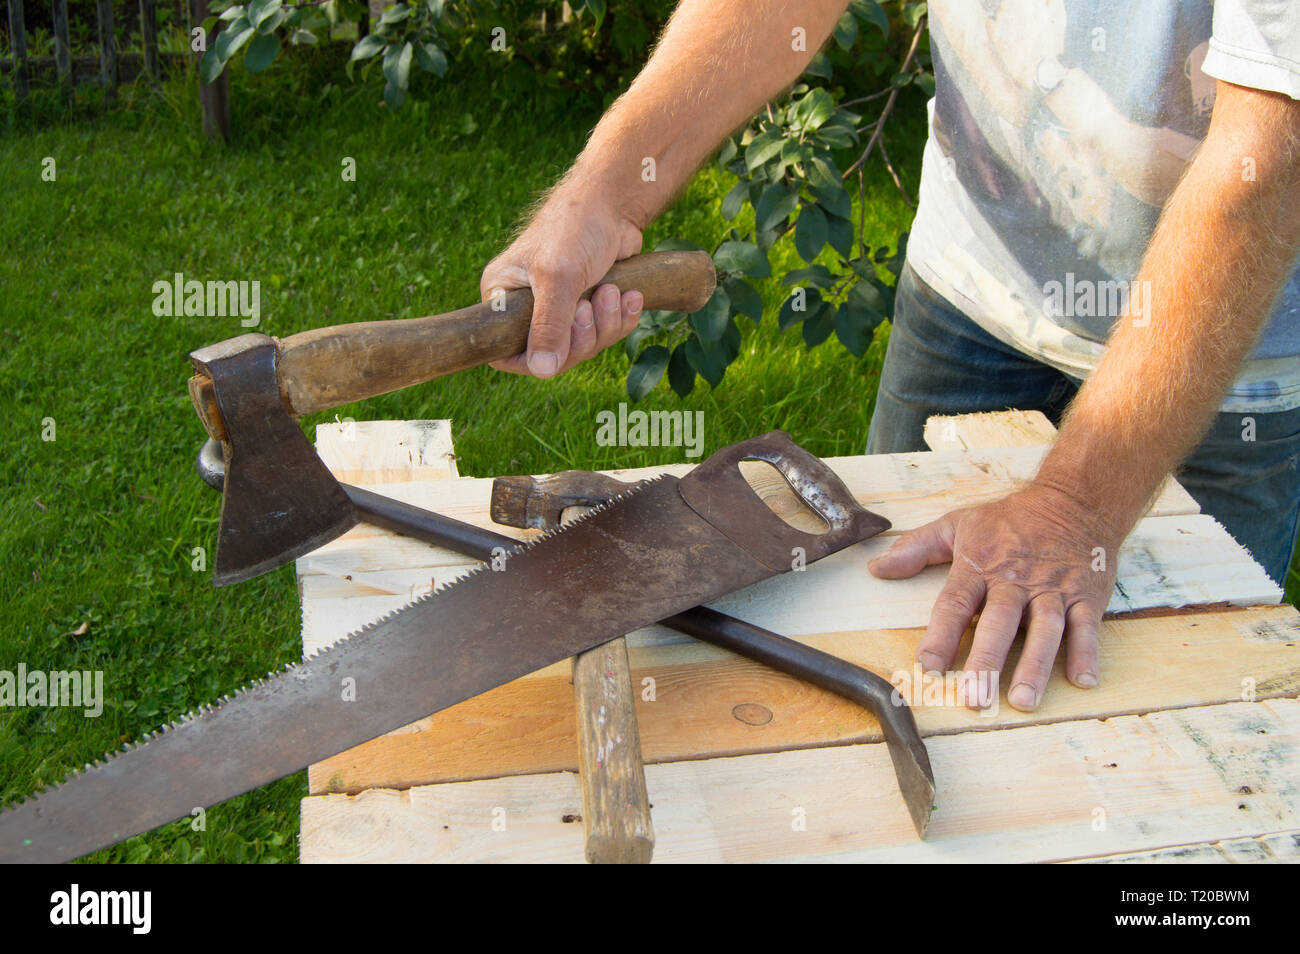 https://c8.alamy.com/comp/T20BWM/man-holding-the-axe-working-with-construction-tools-in-his-garden-T20BWM.jpg